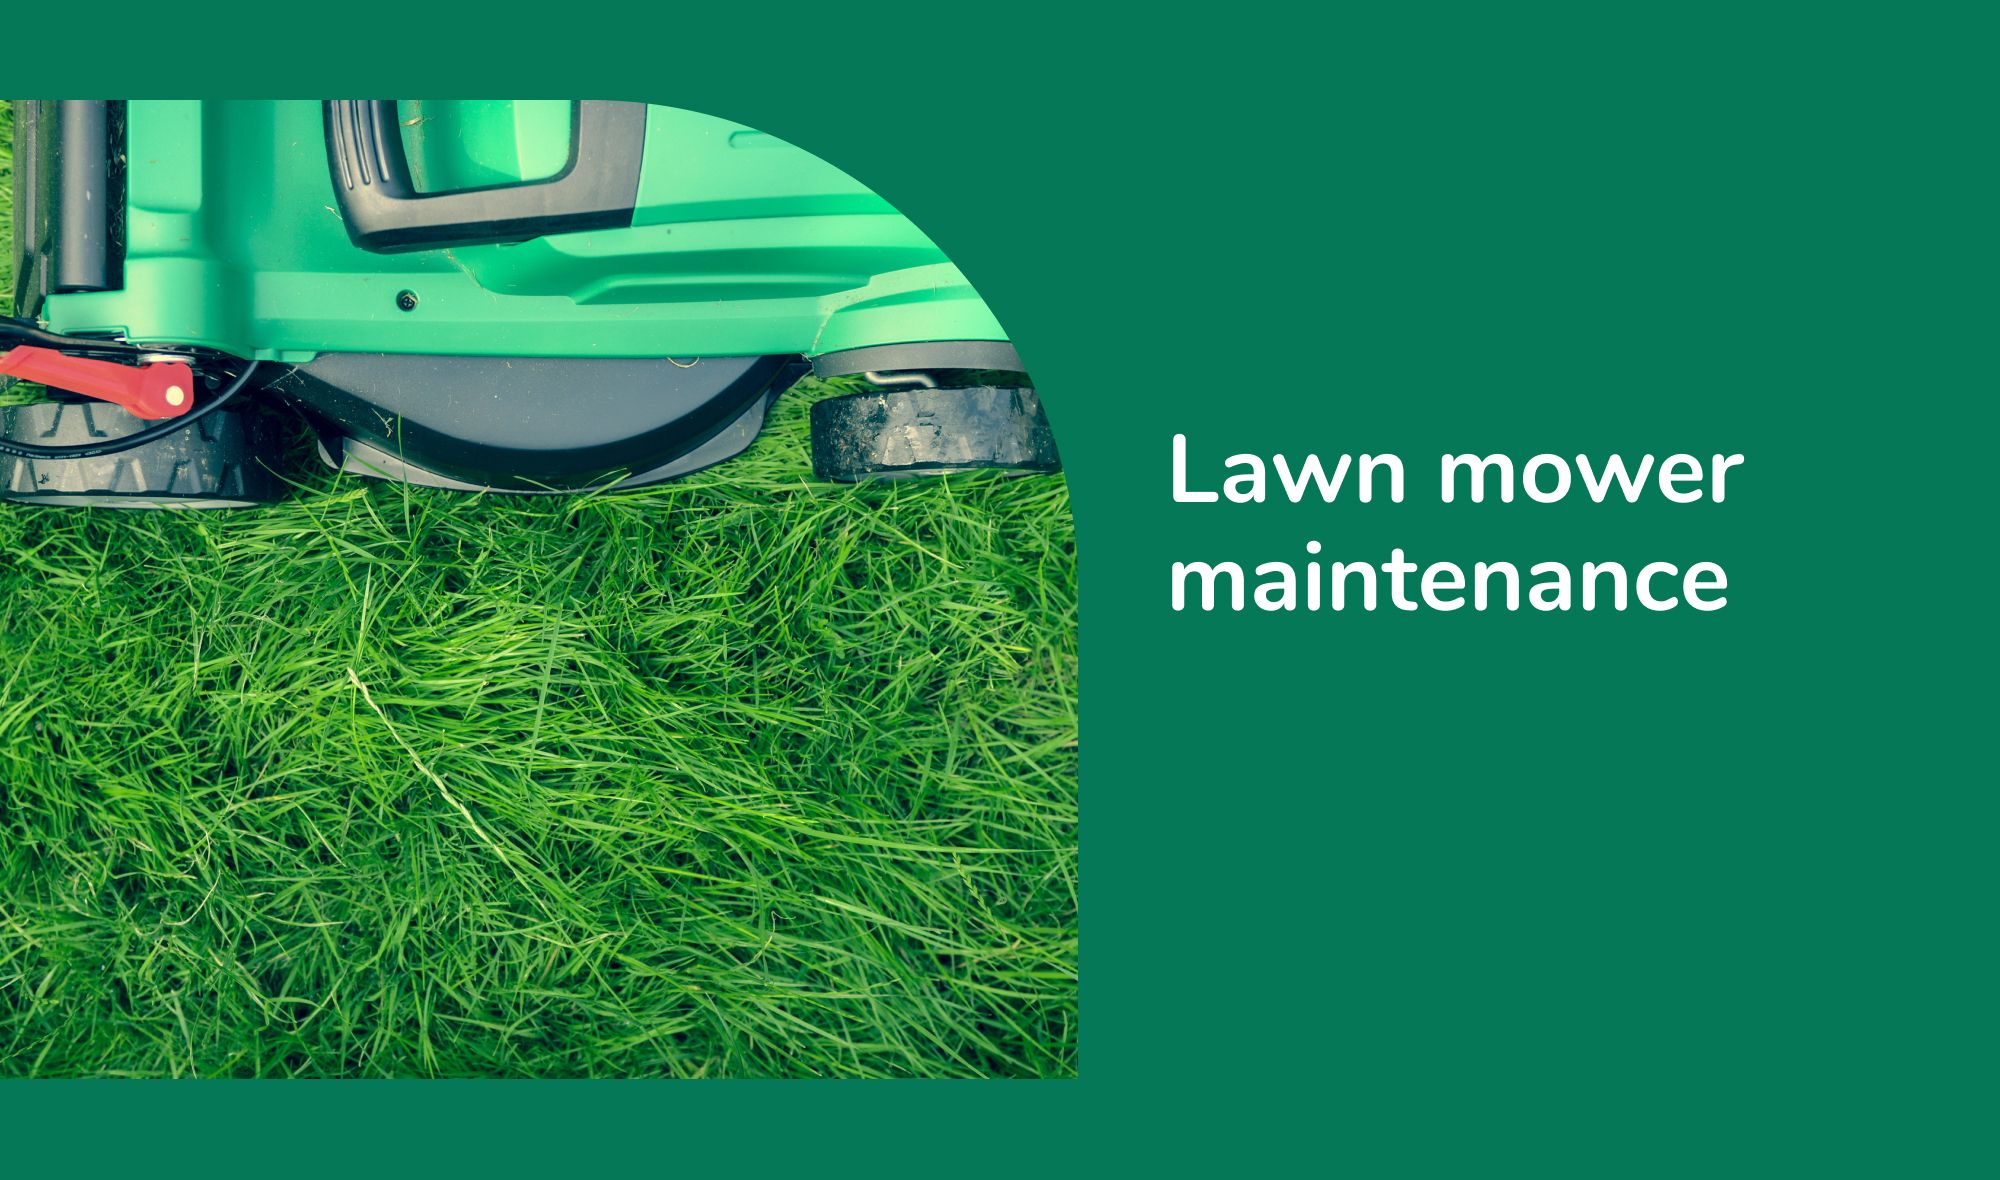 #8 Lawn mower maintenance: the importance of sharp blades in lawn mowing